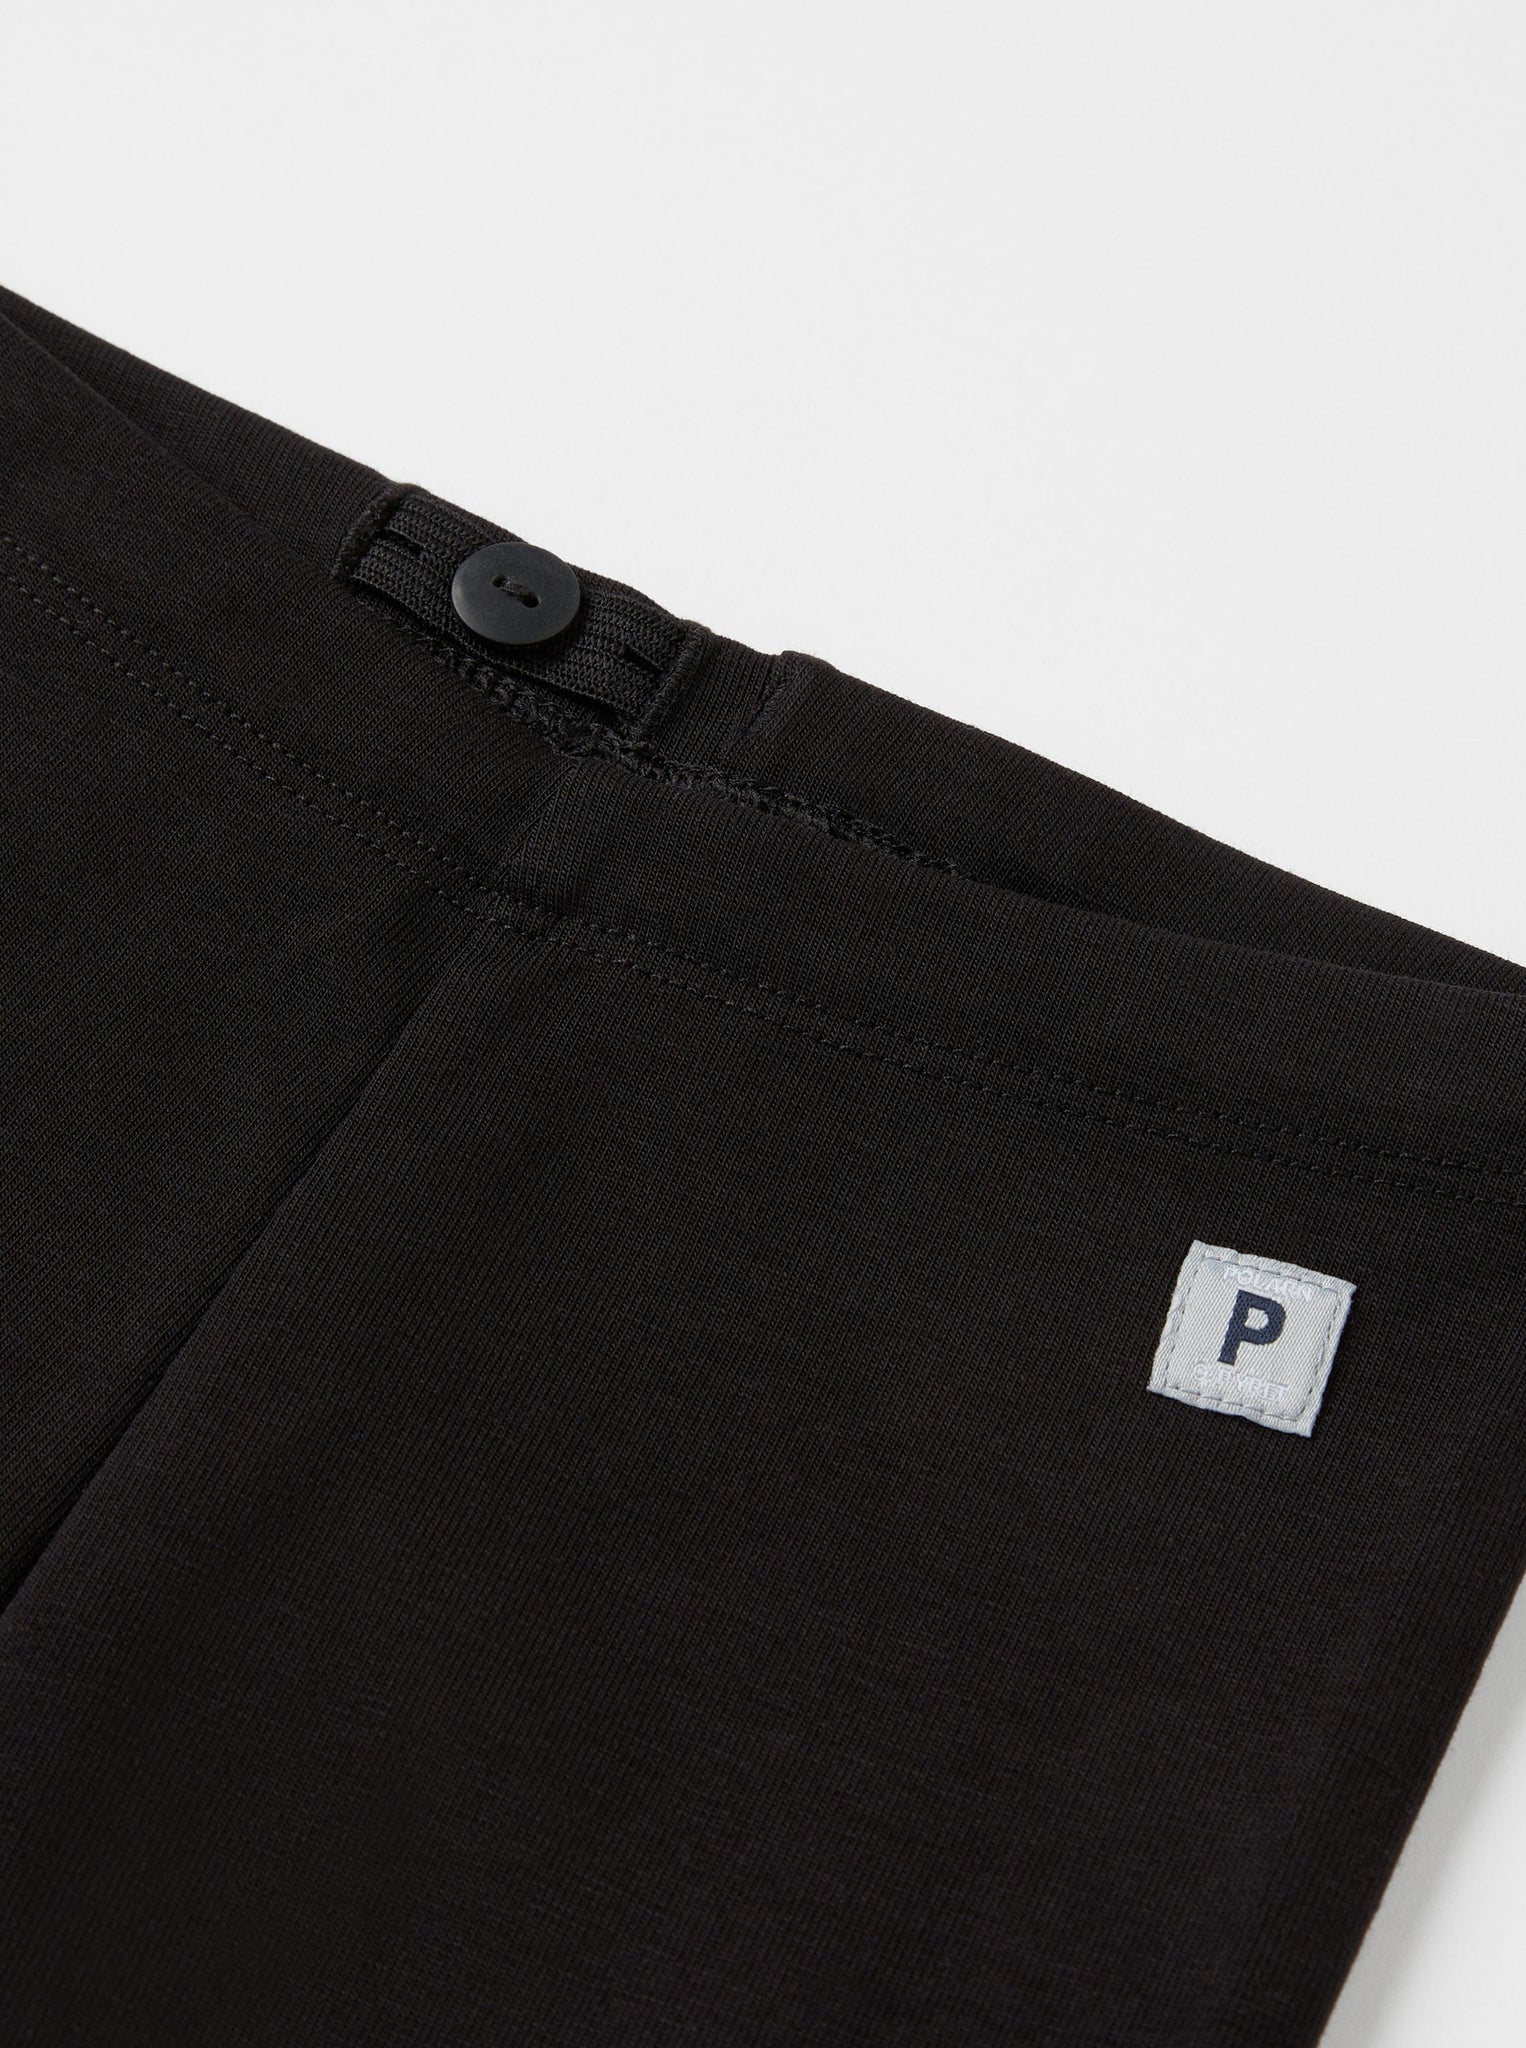 Organic Cotton Baby Black Leggings from the Polarn O. Pyret babywear collection. Nordic kids clothes made from sustainable sources.